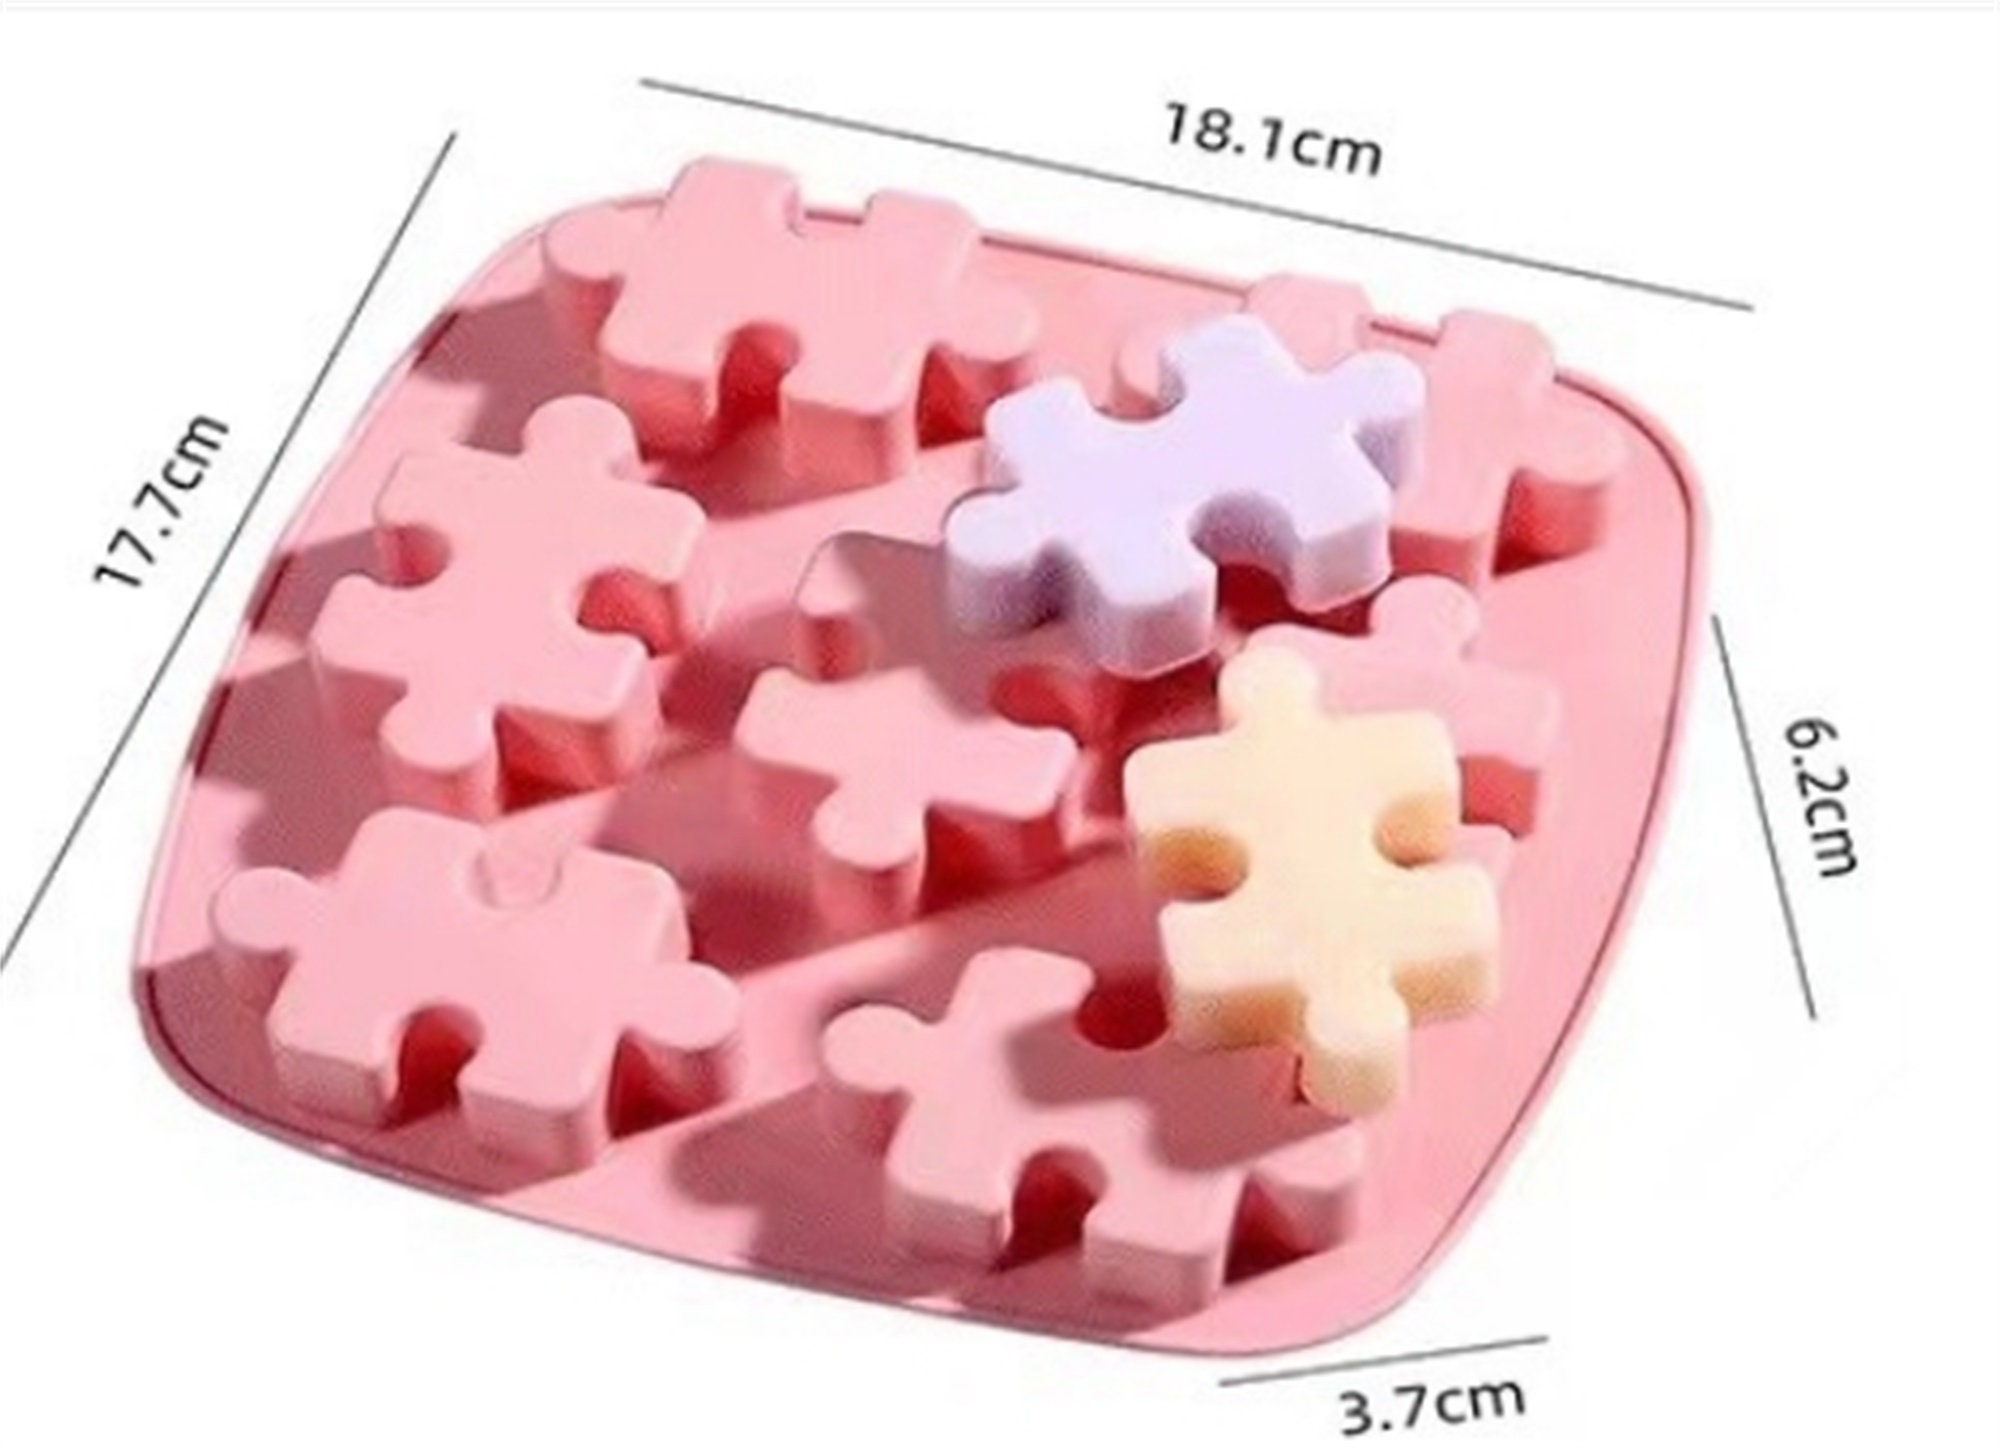 Chocolate Mold Cake Mould 7-puzzle Jigsaw Flexible Silicone 